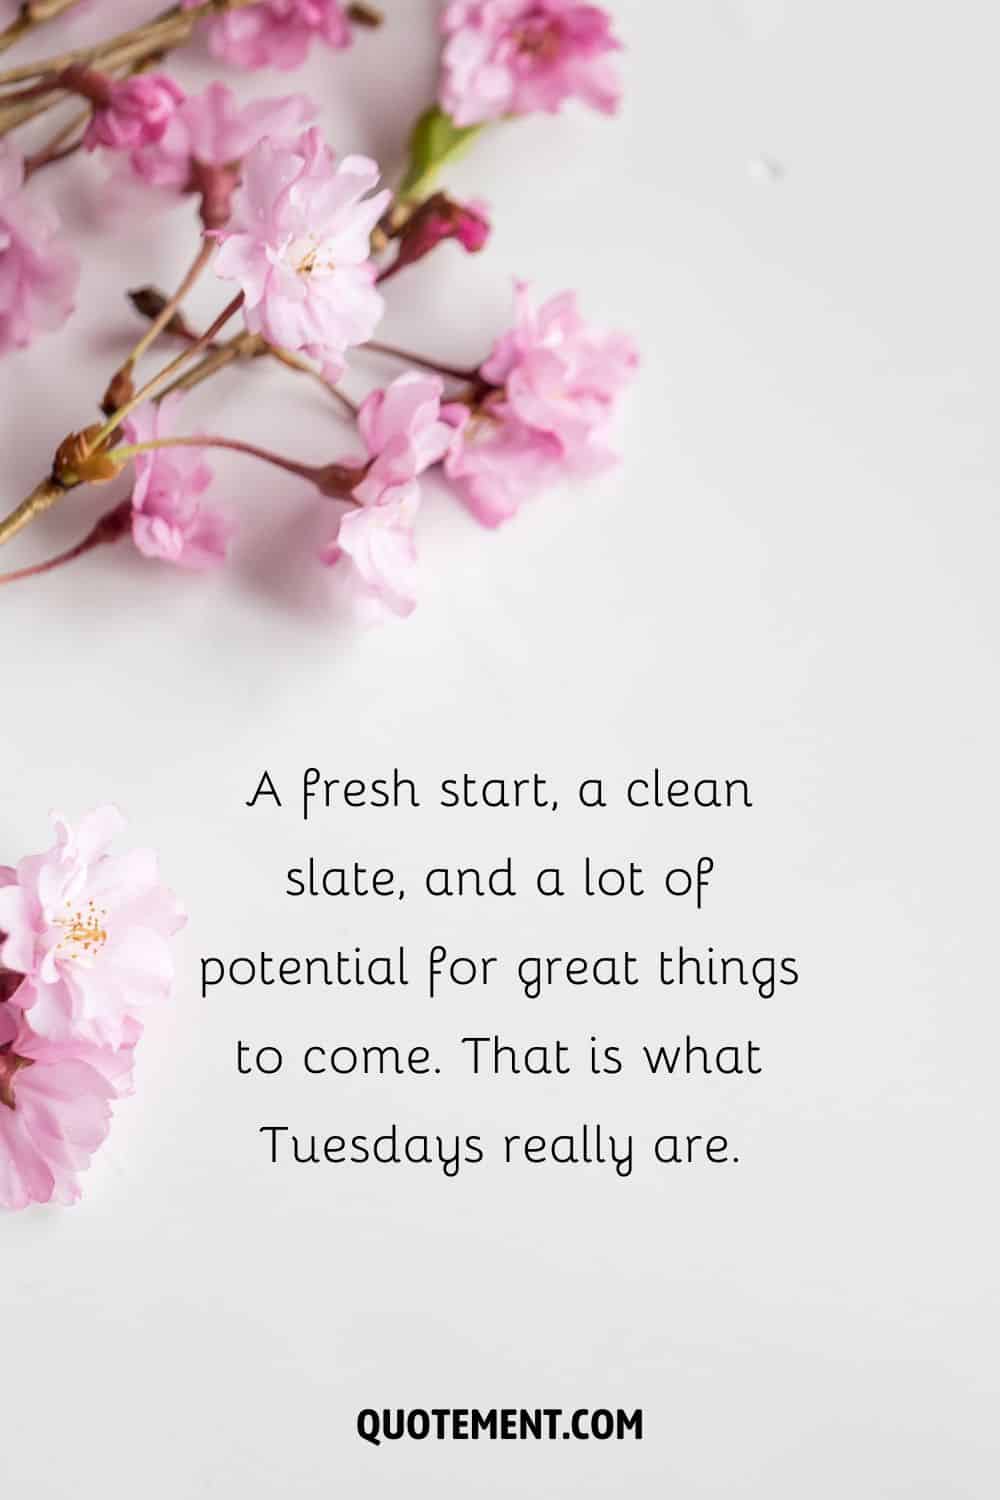 pink flowers image representing Tuesday inspirational quote